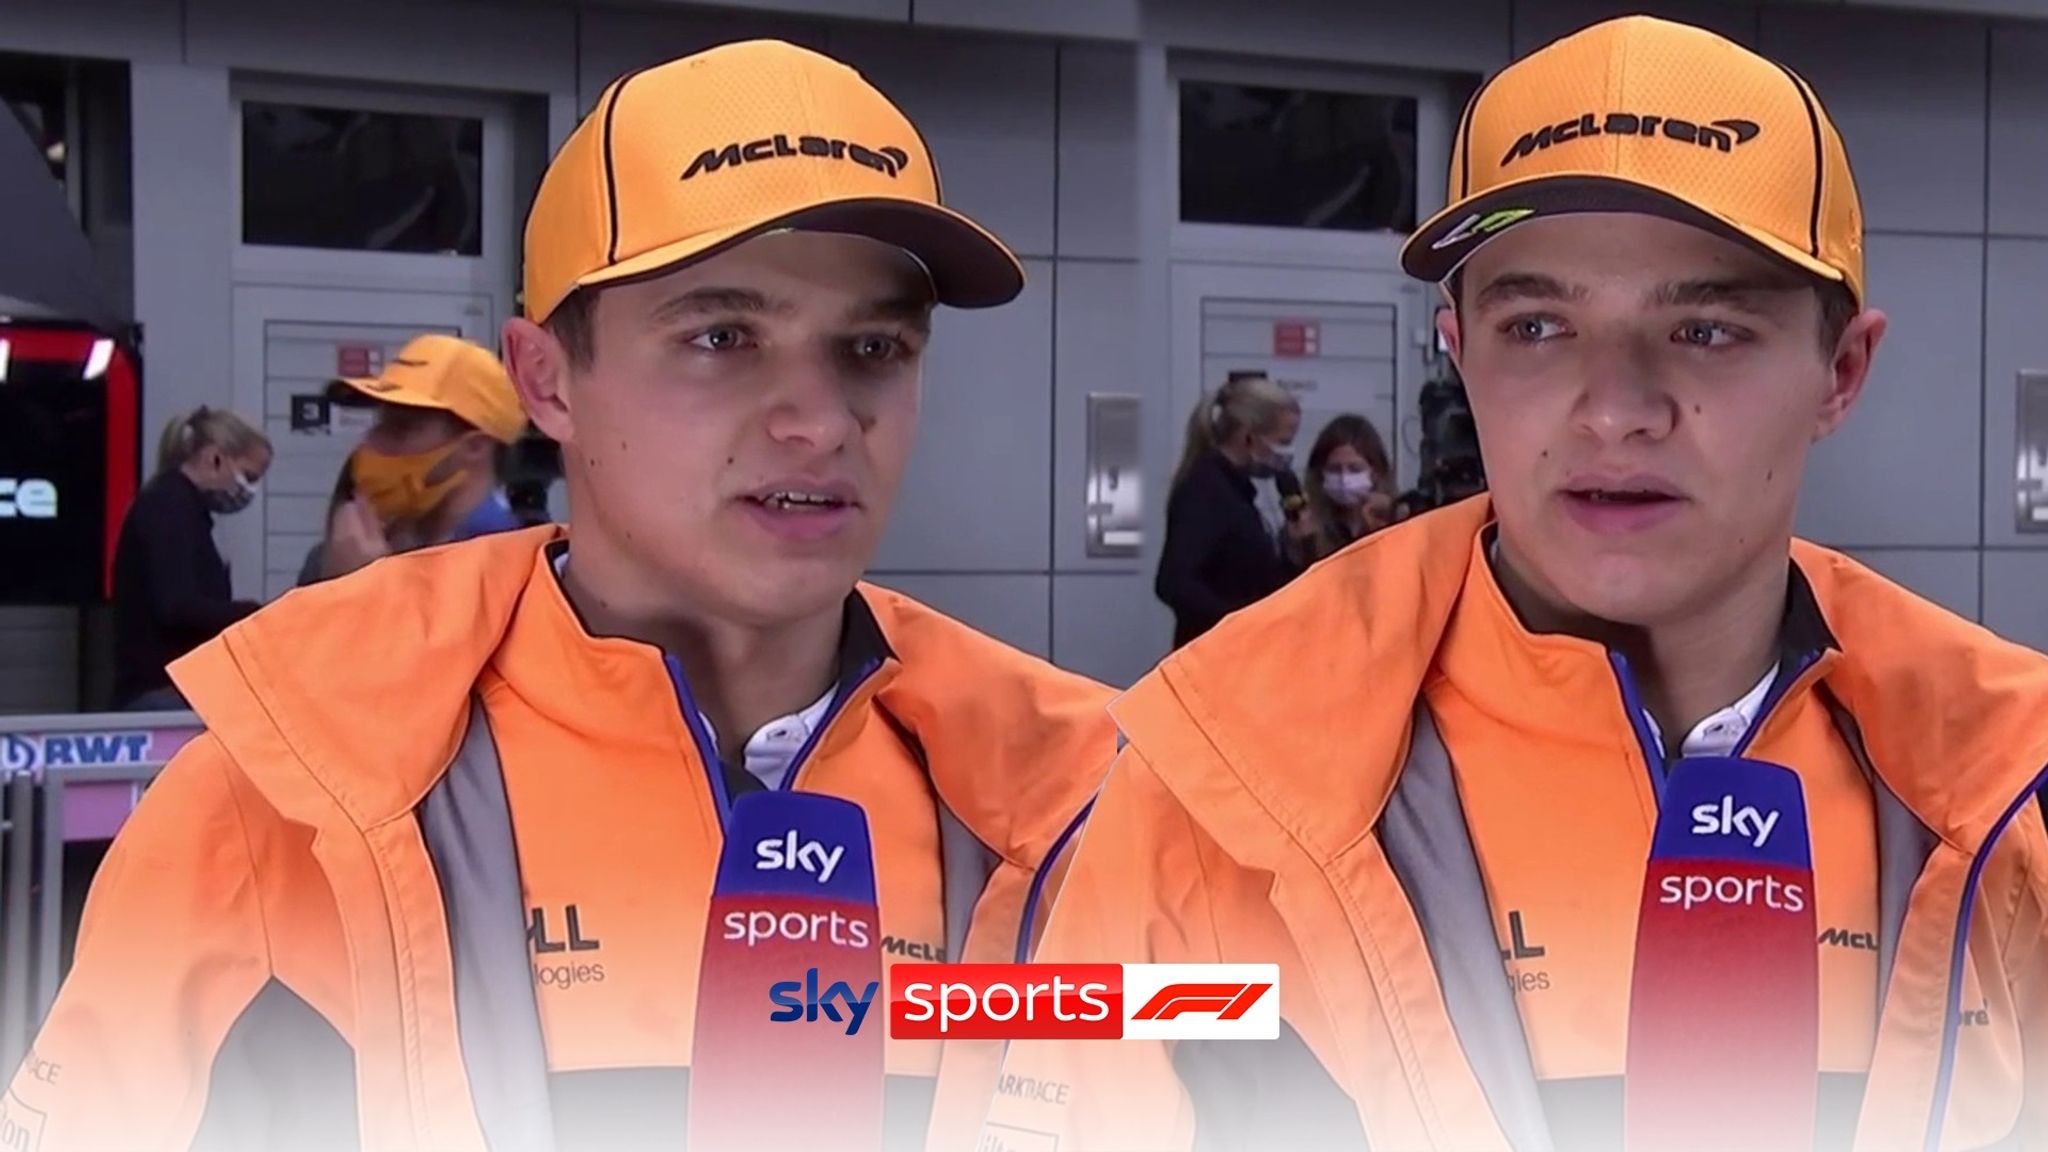 Russian GP Lando Norris devastated to lose race win as McLaren rue wrong decision to stay out in rain F1 News